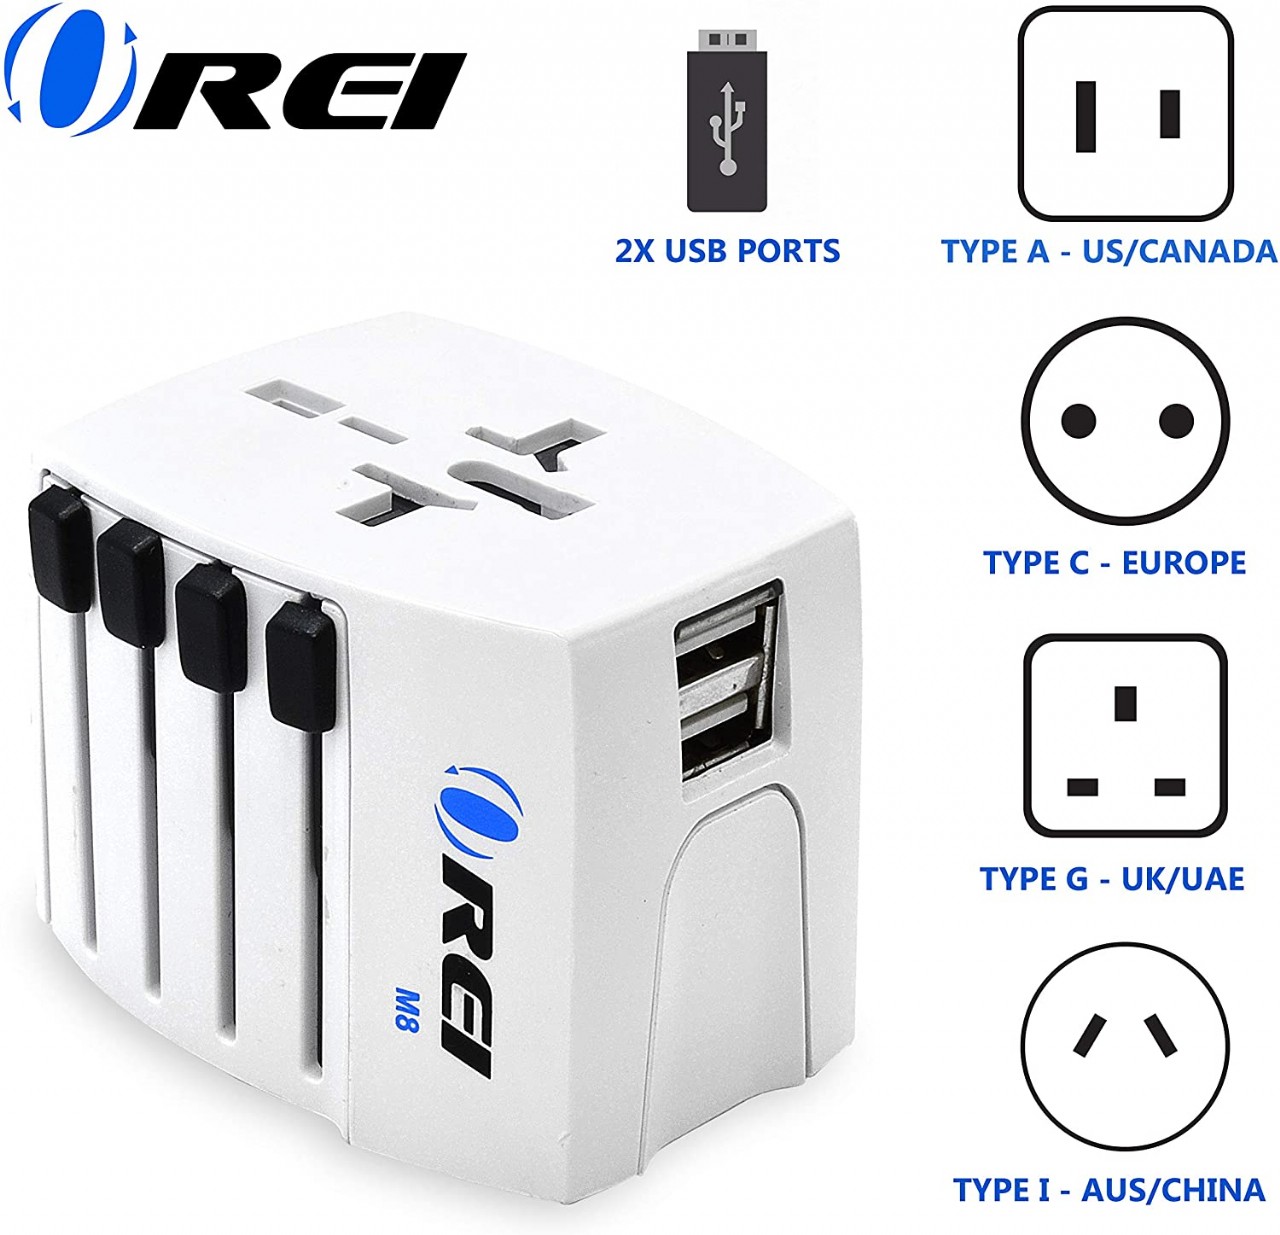 International Power Plug for Worldwide Wall Charger with Dual USB Charging Ports for Cell Phones